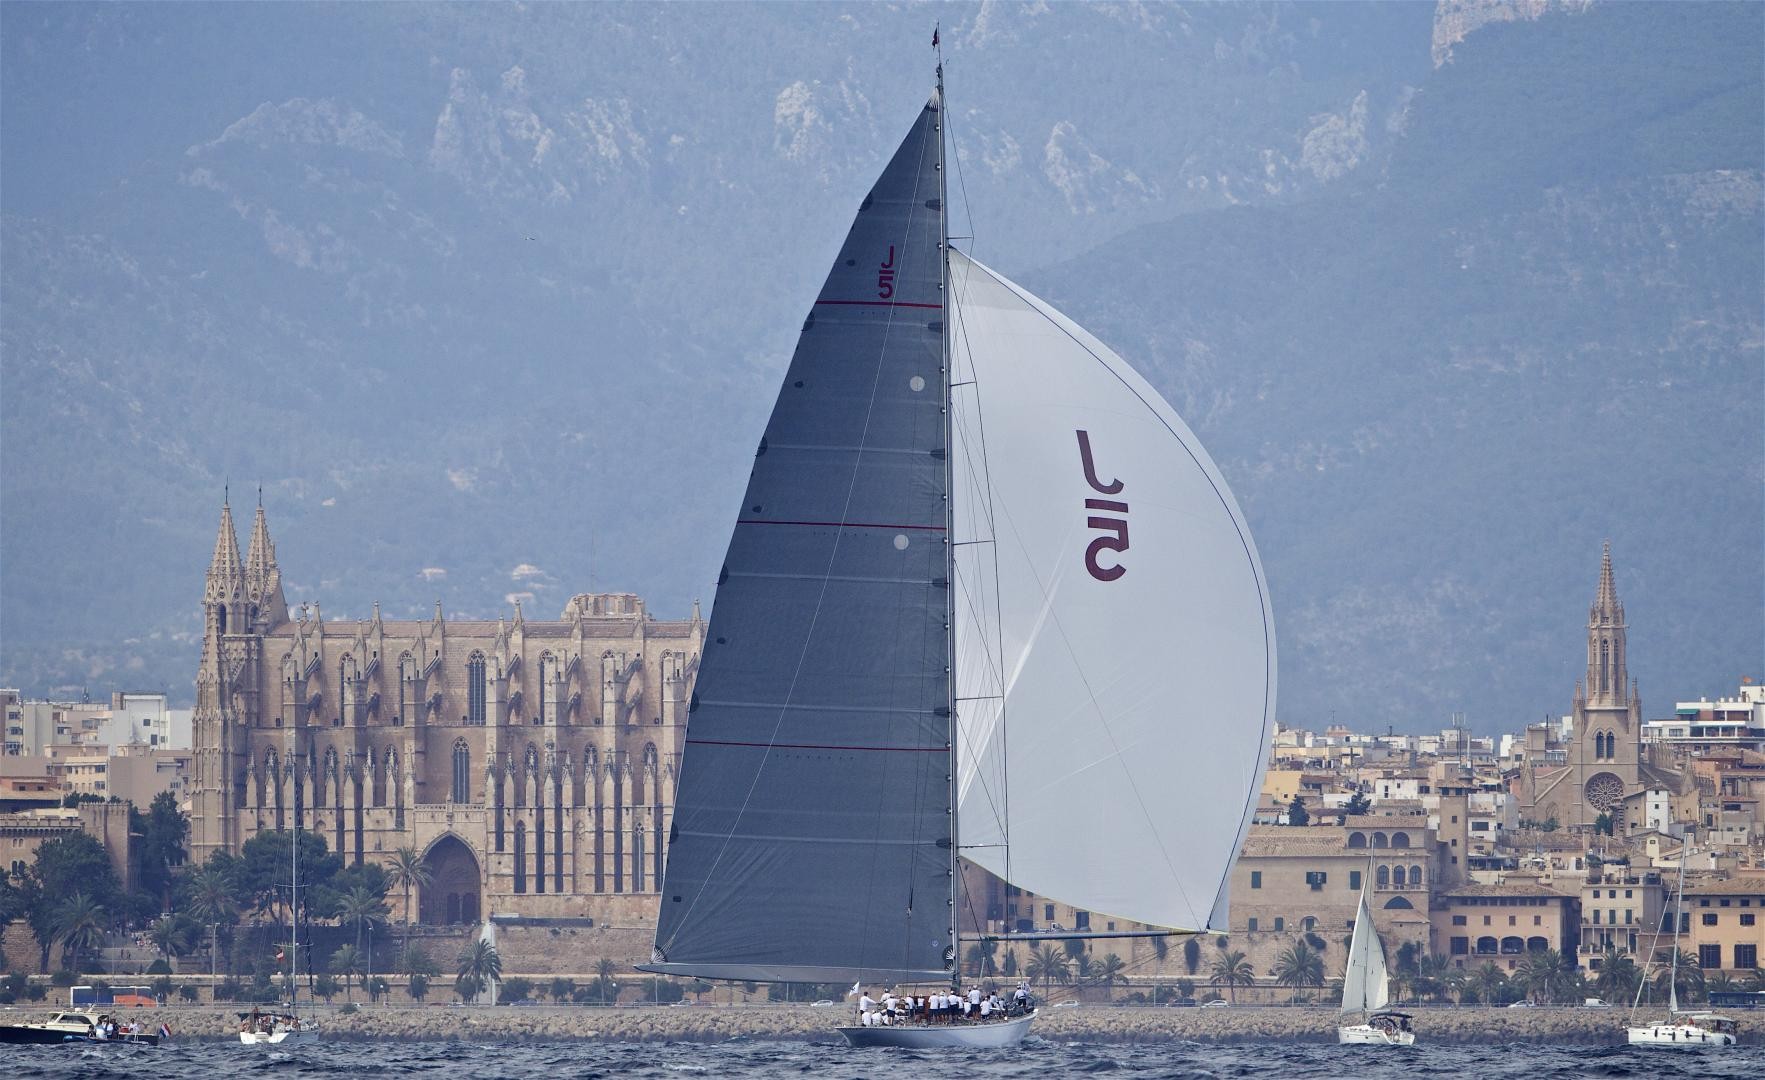 Velsheda, Topaz and Ranger will join the Superyacht Cup Palma in 2022